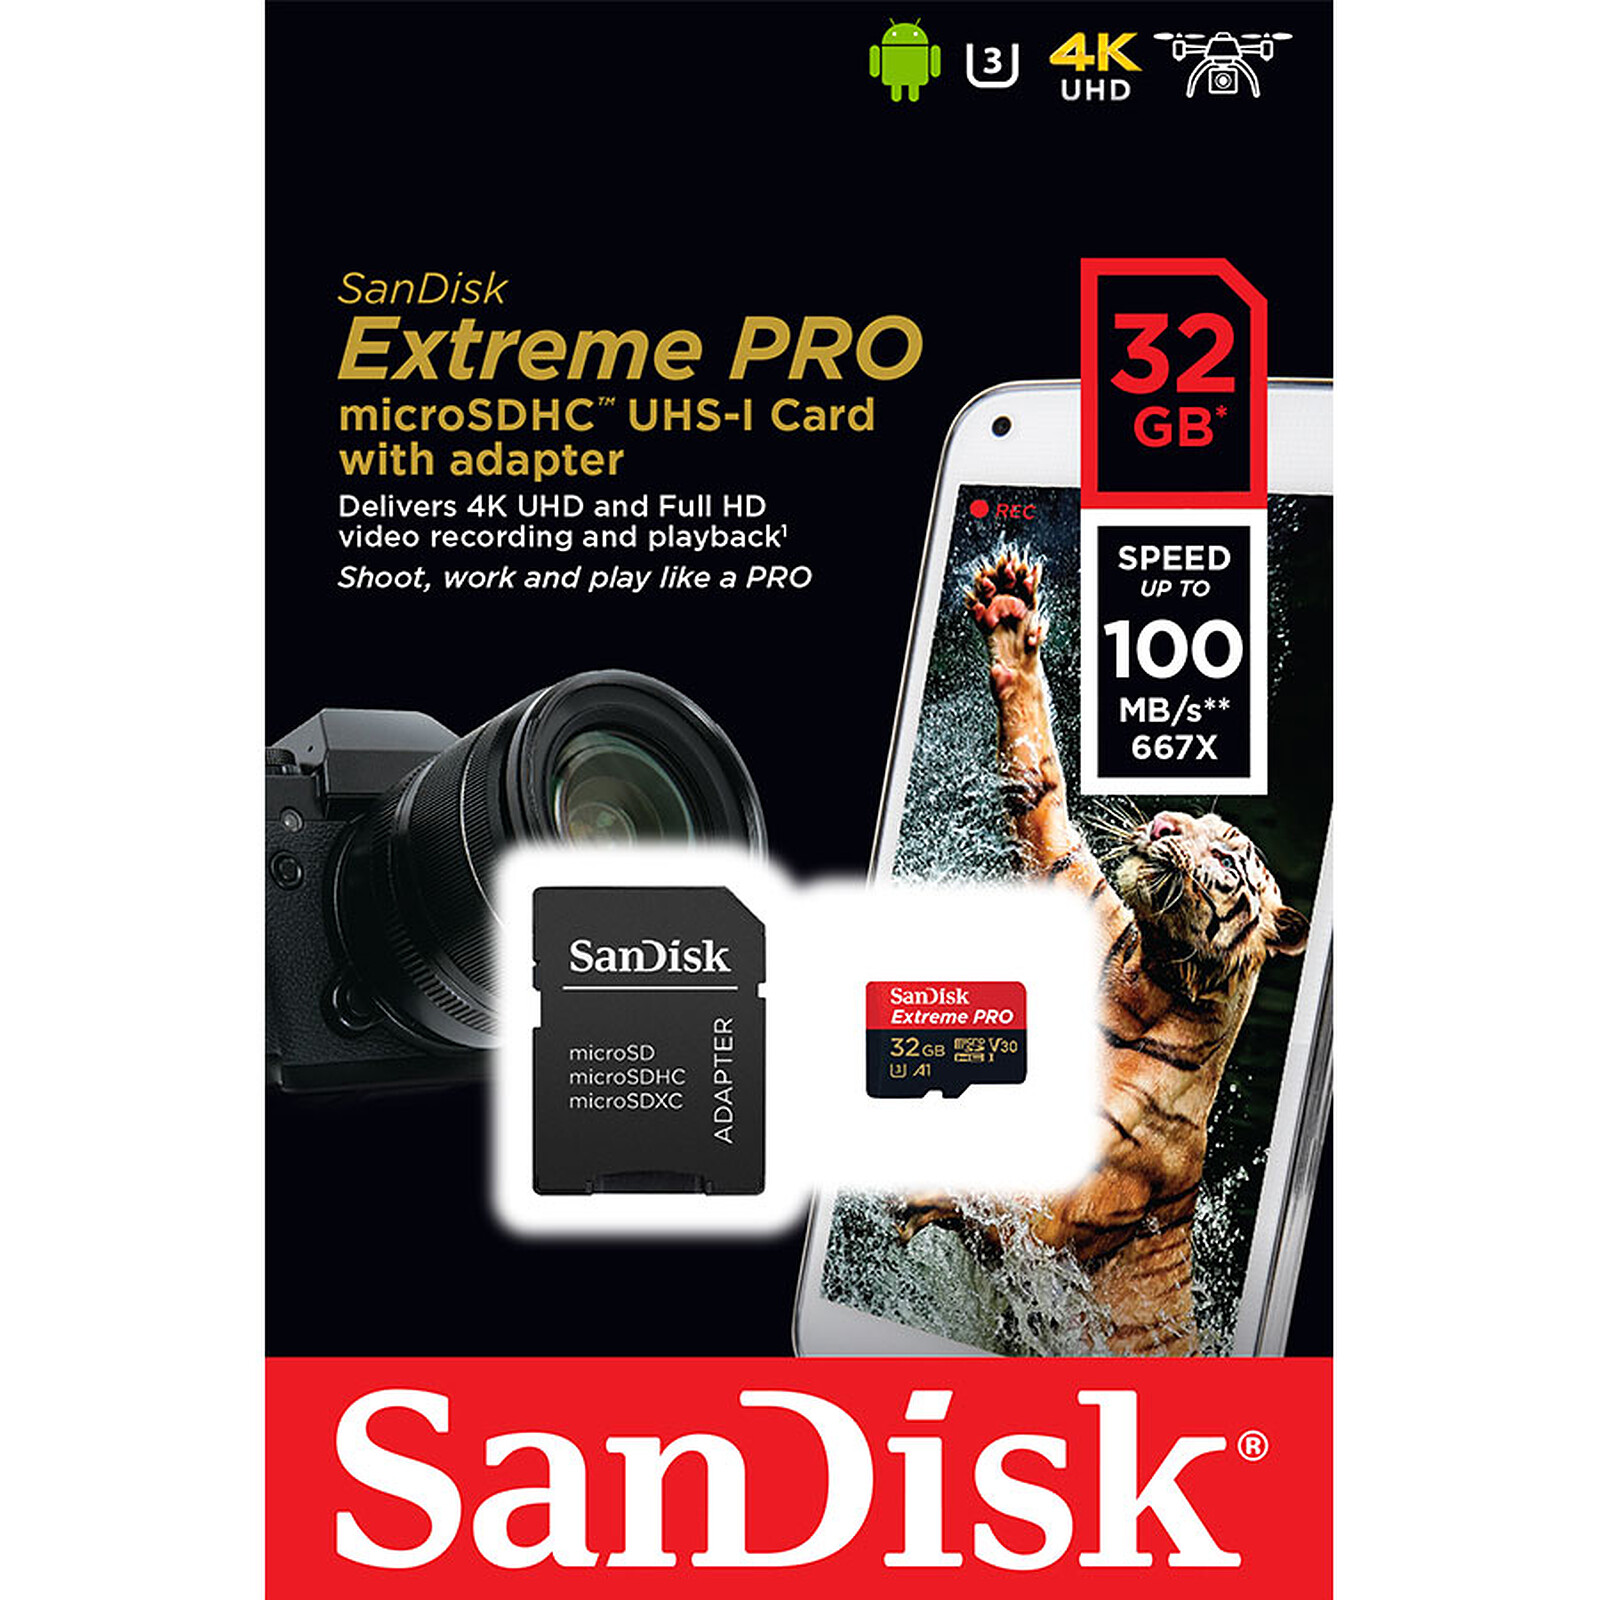 hard to please Sideways clarity SanDisk Extreme Pro microSDHC UHS-I U3 V30 A1 32GB SD Adapter - Memory card  Sandisk on LDLC